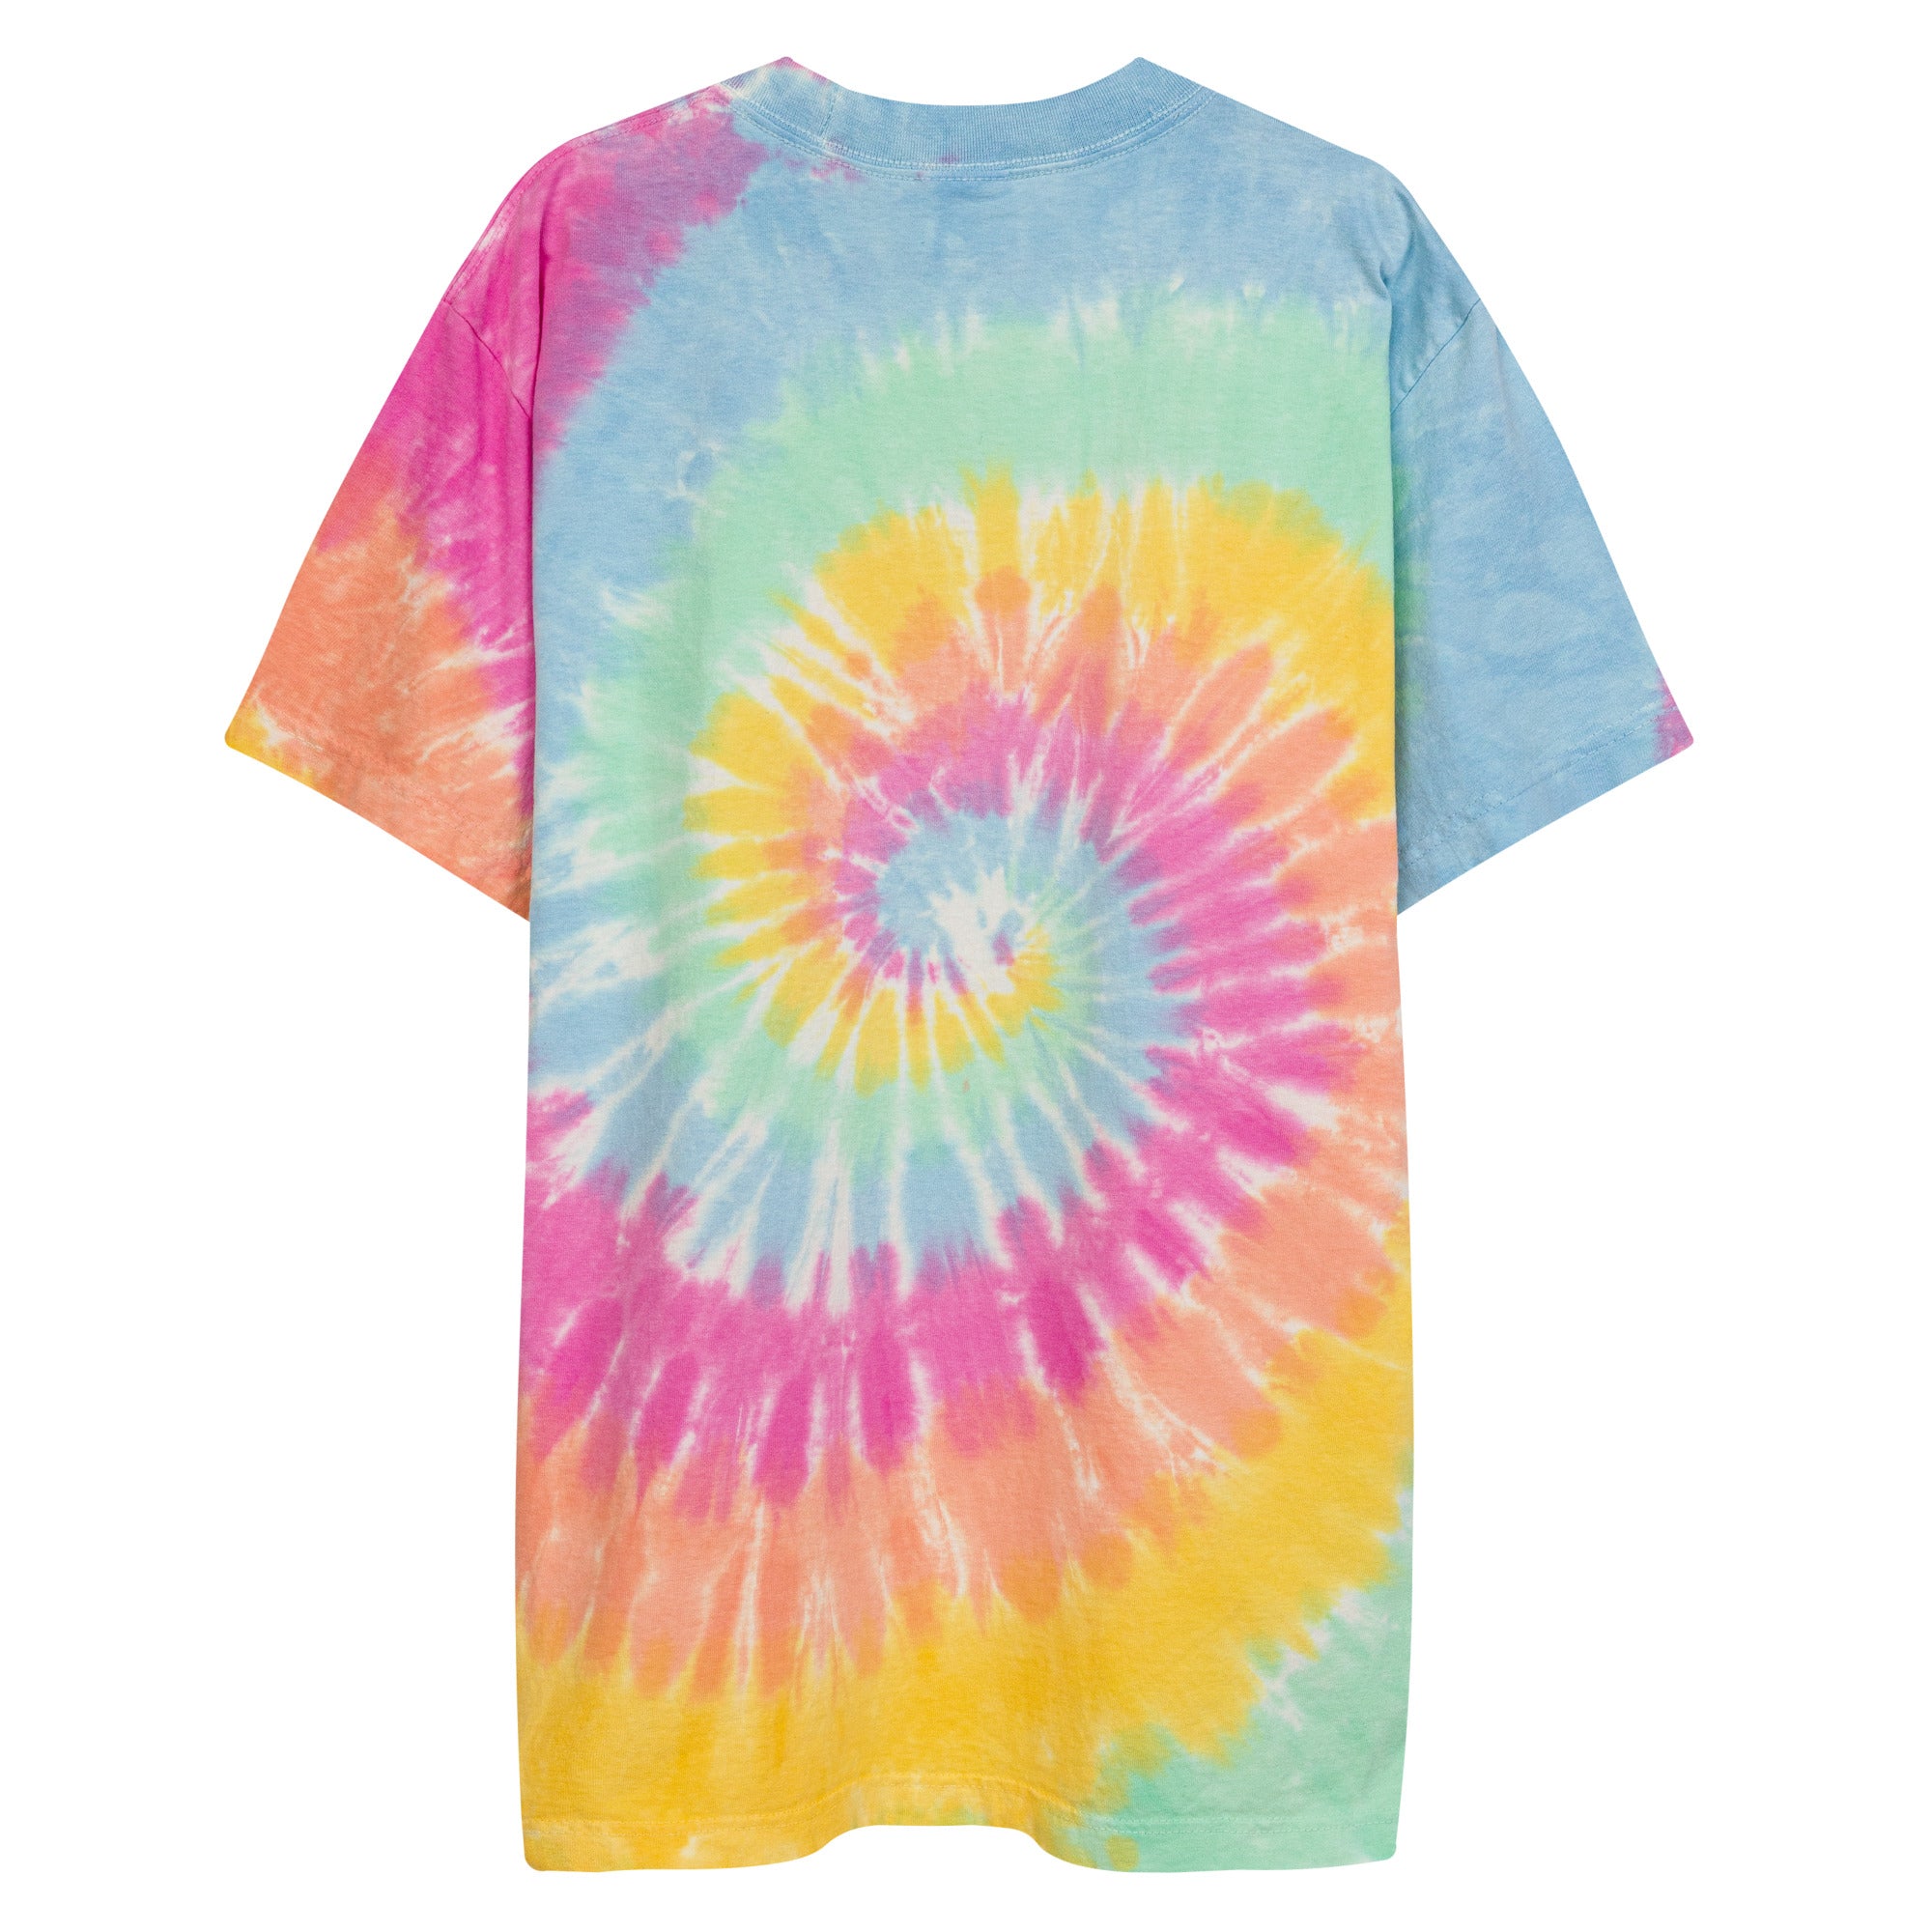 LUCID DAYDREAMER -*Oversized tie-dye Tee (+more colors)